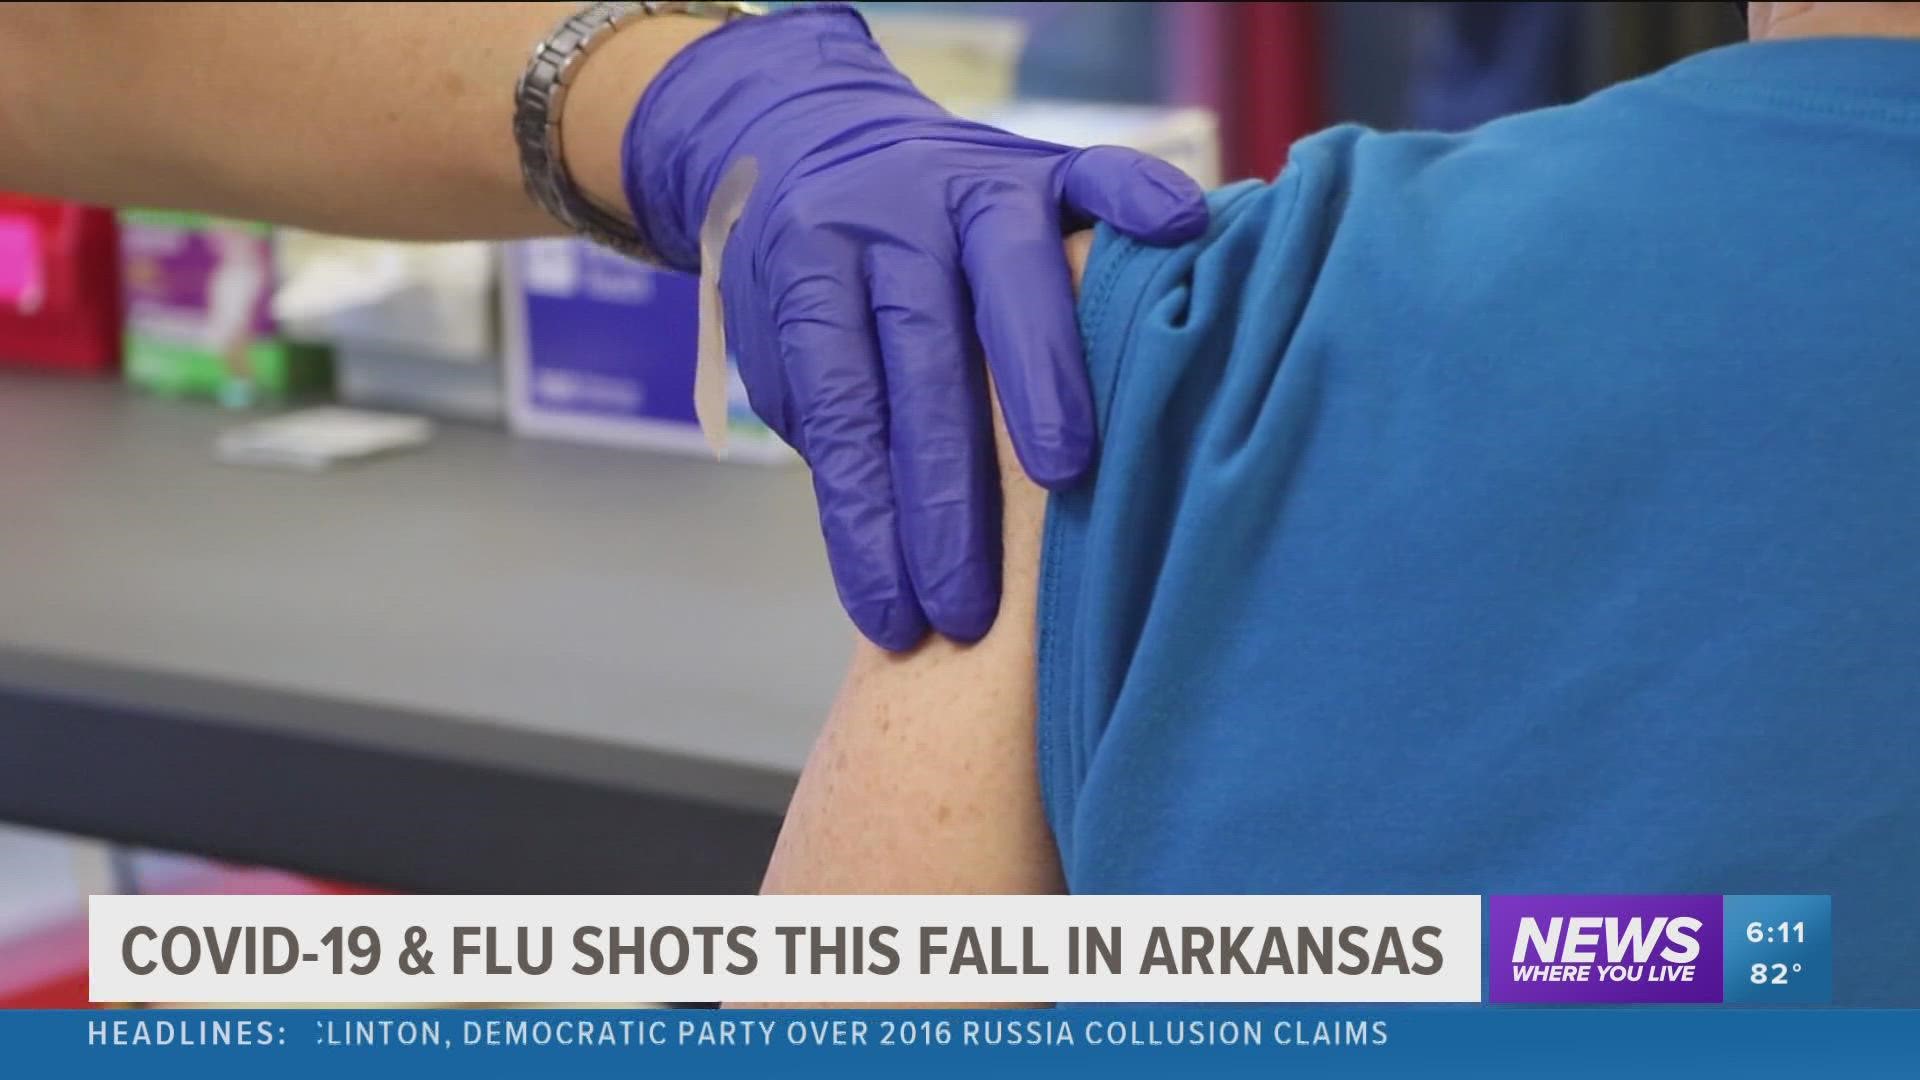 About 25% of people visiting pharmacies in Arkansas are getting both a COVID-19 and flu vaccine for this fall.